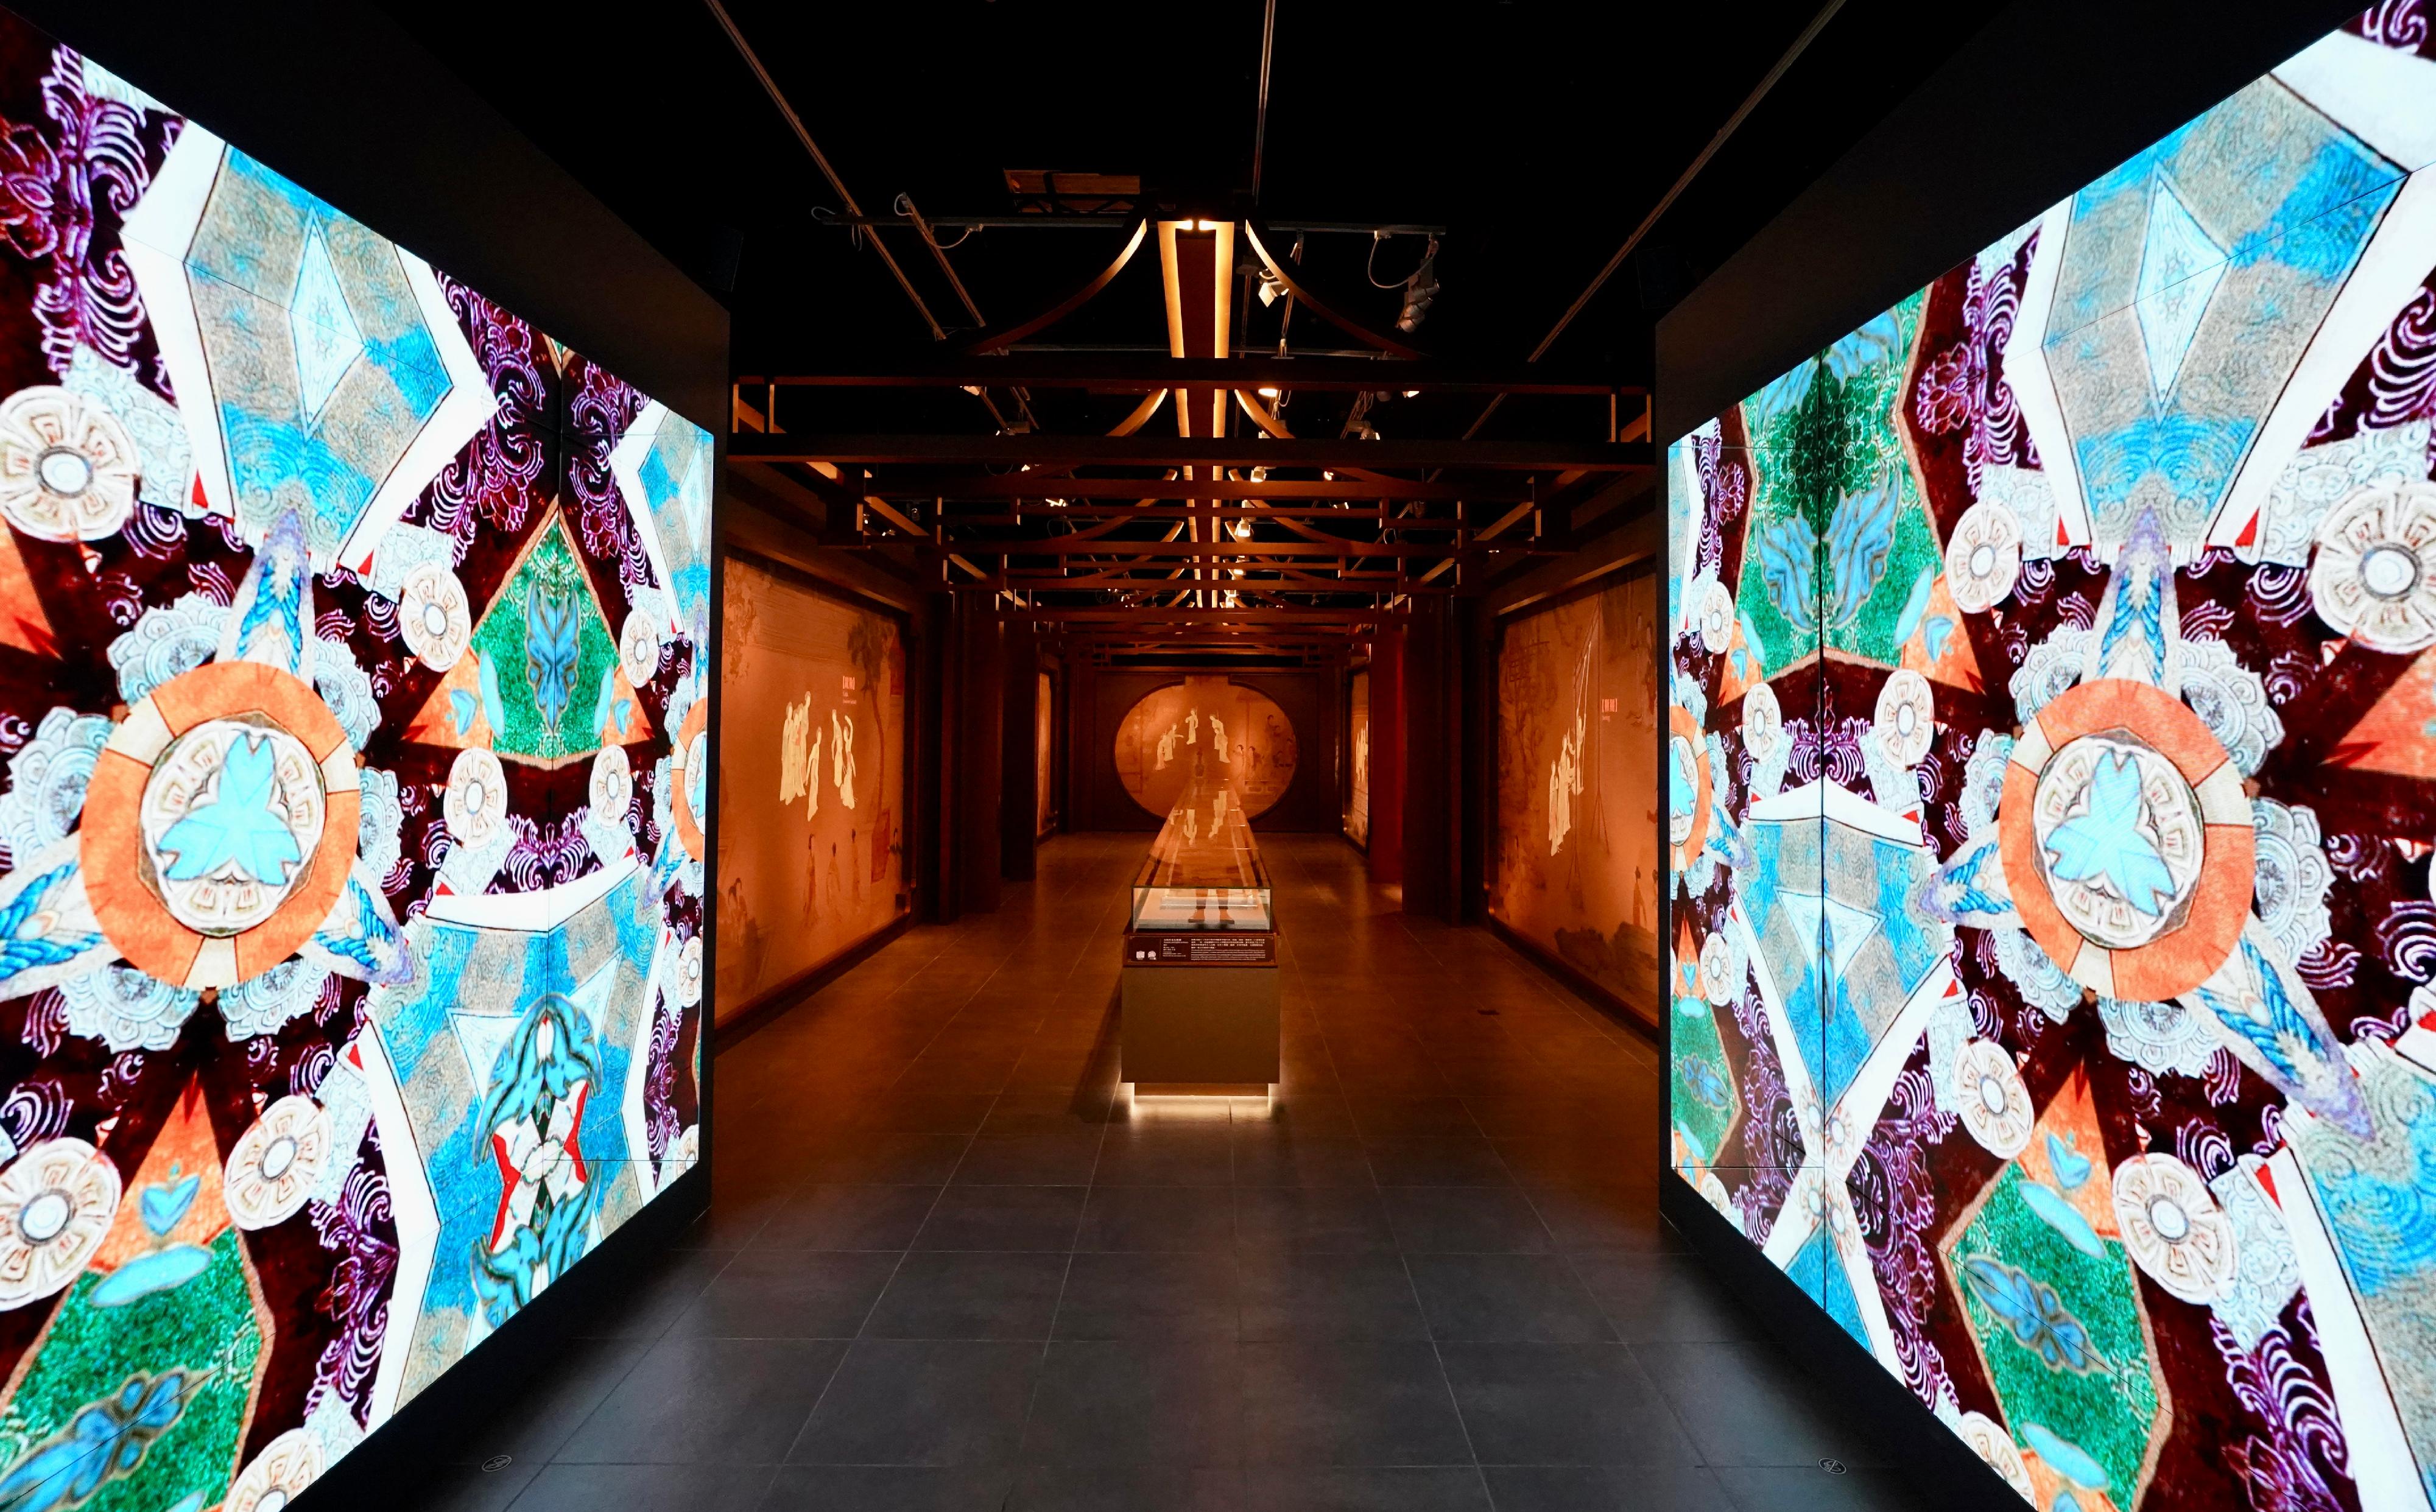 The opening ceremony for the exhibition "The Hong Kong Jockey Club Series: Women and Femininity in Ancient China - Treasures from the Nanjing Museum" was held today (November 29) at the Hong Kong Heritage Museum. Photo shows a multimedia display at the entrance of the exhibition gallery. 